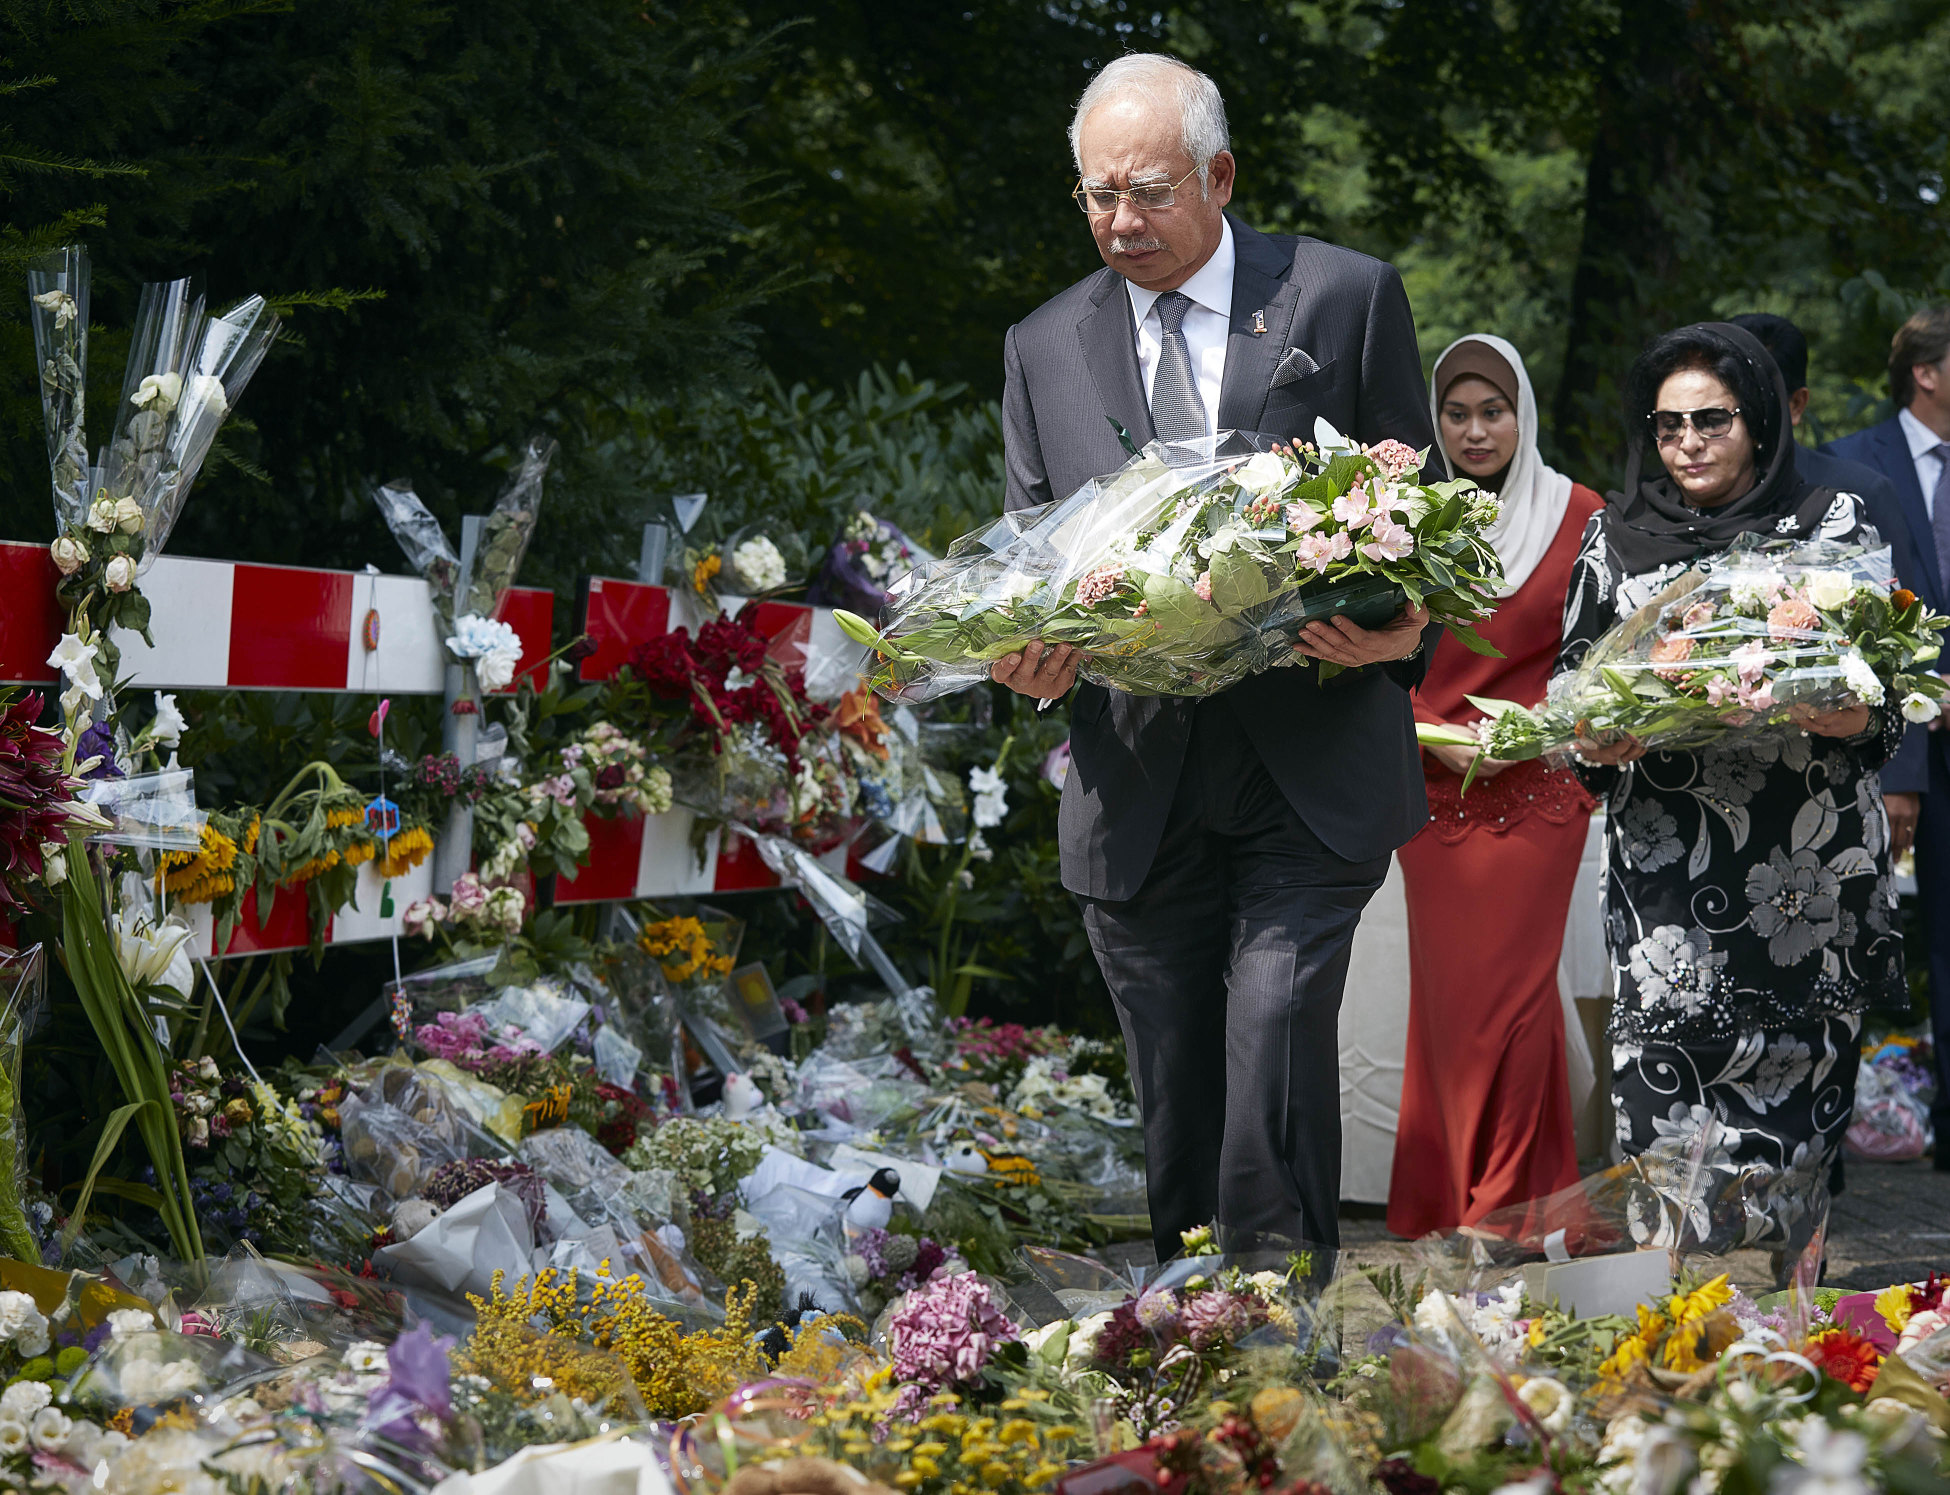 Malaysian Prime Minister Najib Razak lays flowers among other flower tributes outside a military barracks where forensic experts identify bodies recovered from the wreckage of Flight 17. Photo: AP